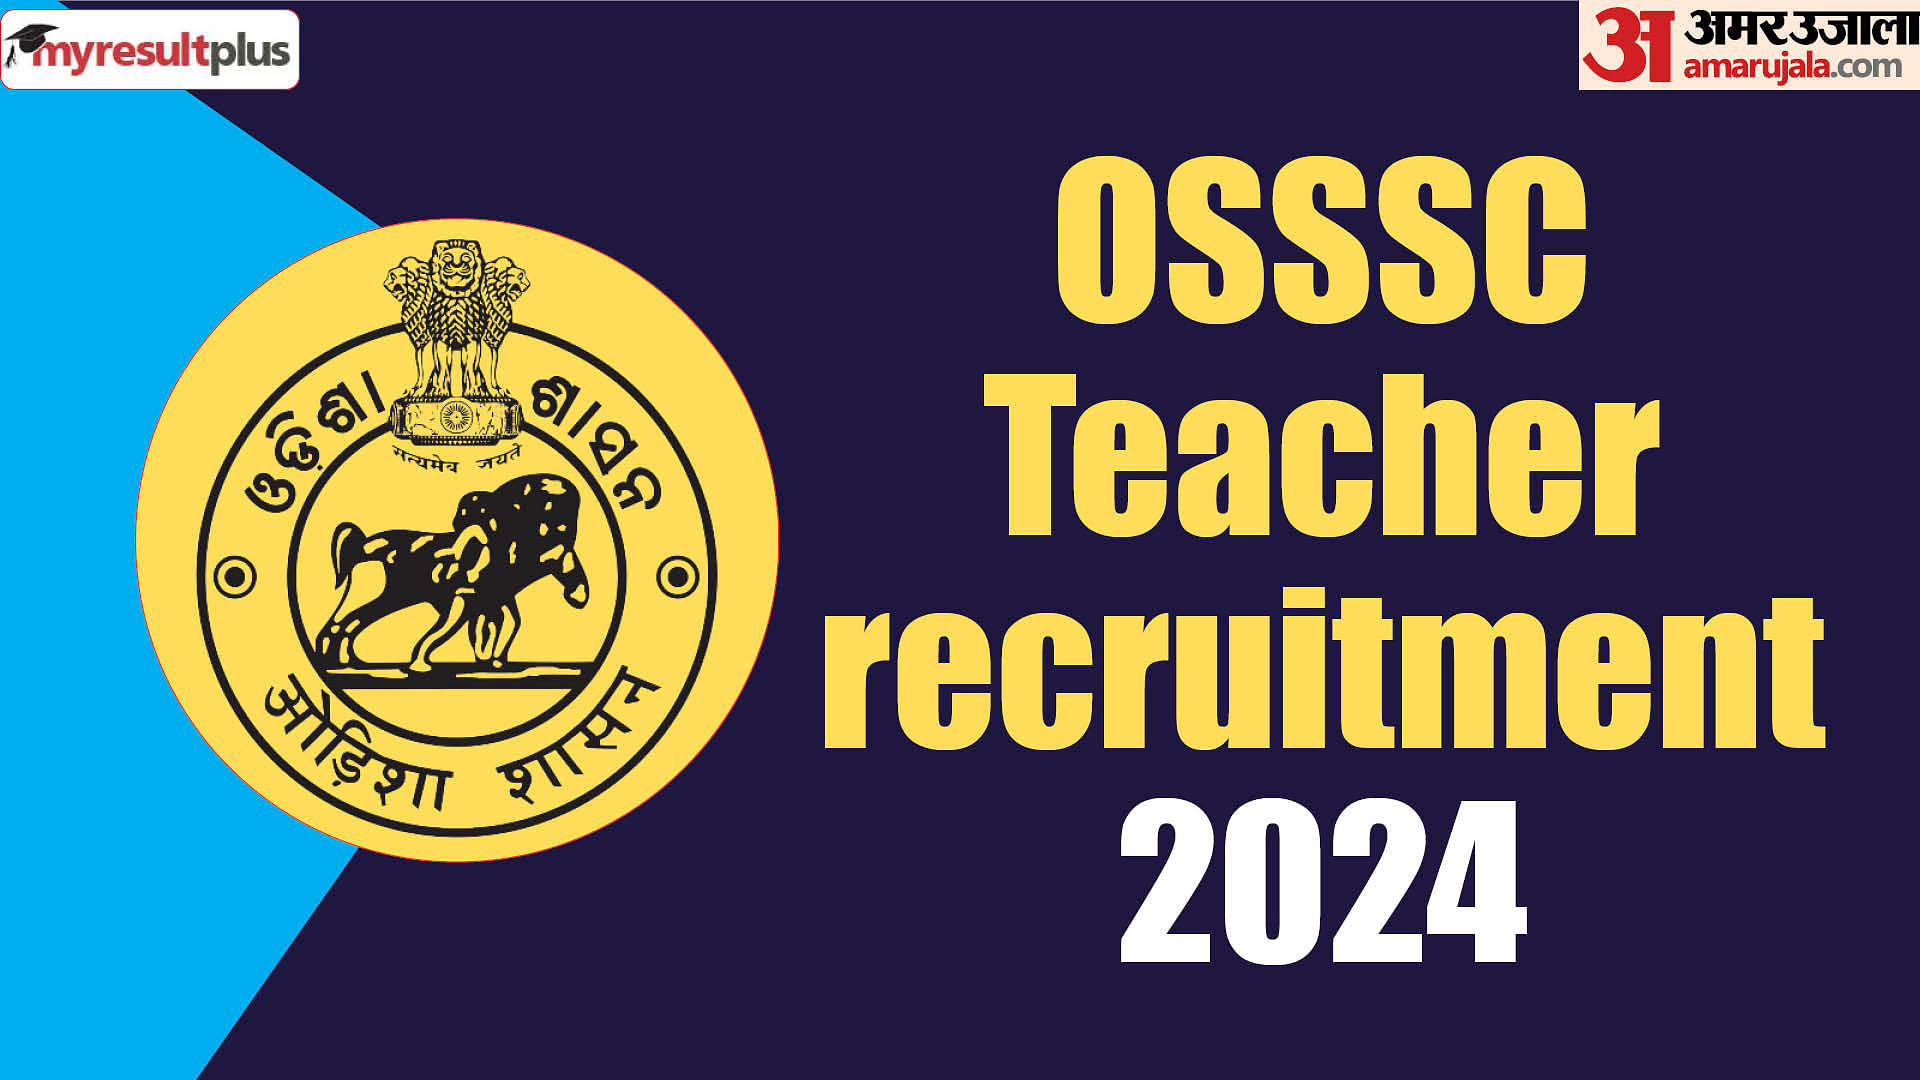 OSSSC 2024 recruitment exam registration postponed, Check new dates and vacancy details Here